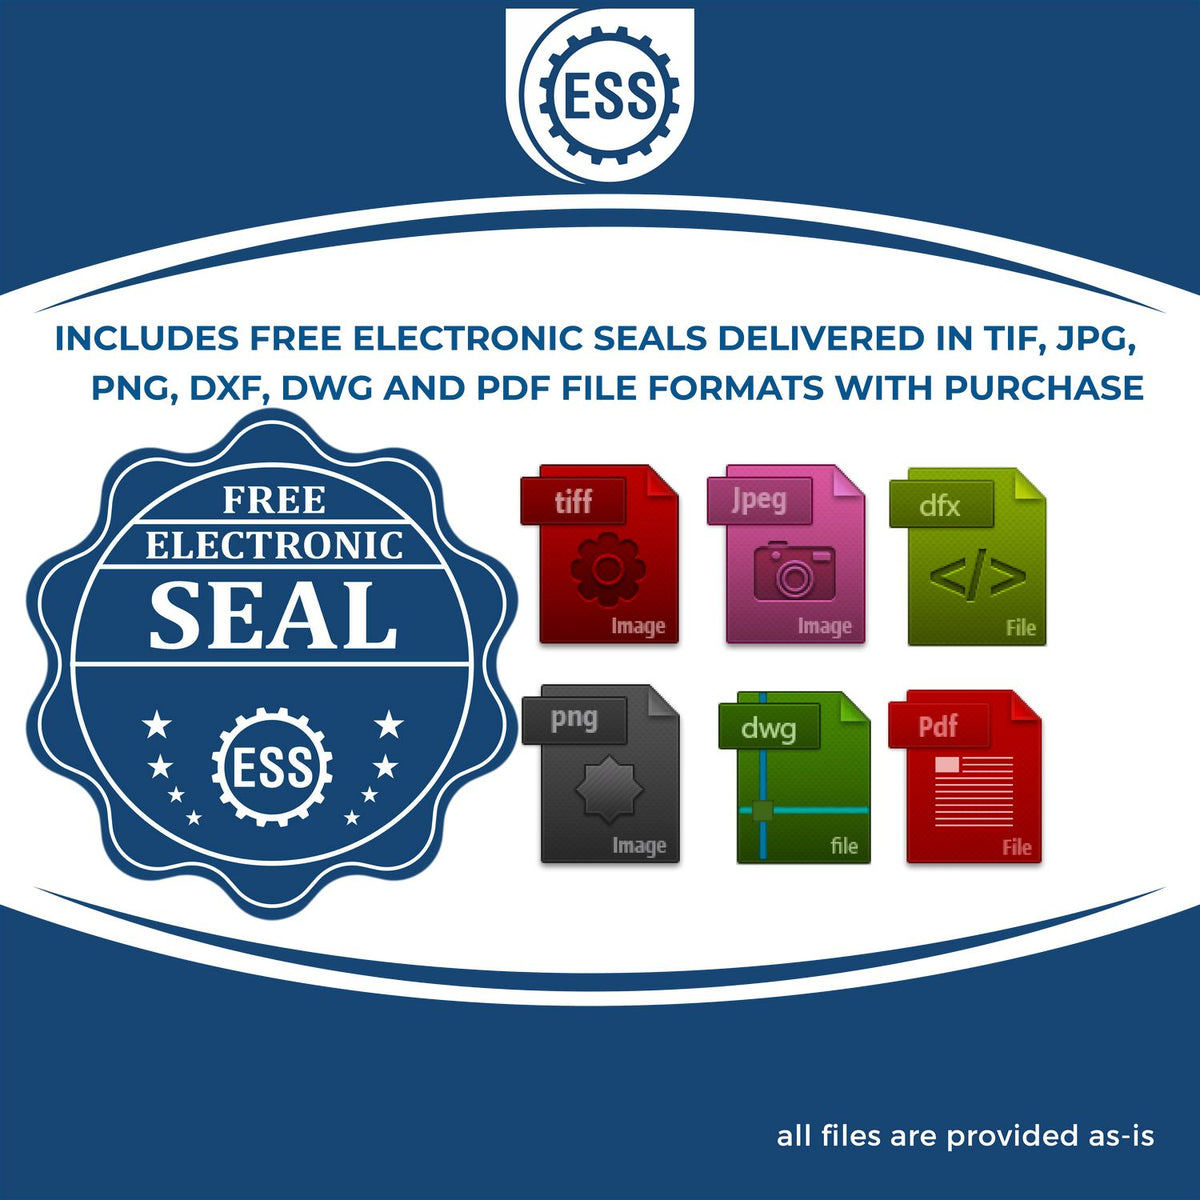 An infographic for the free electronic seal for the Kentucky Professional Geologist Seal Stamp illustrating the different file type icons such as DXF, DWG, TIF, JPG and PNG.